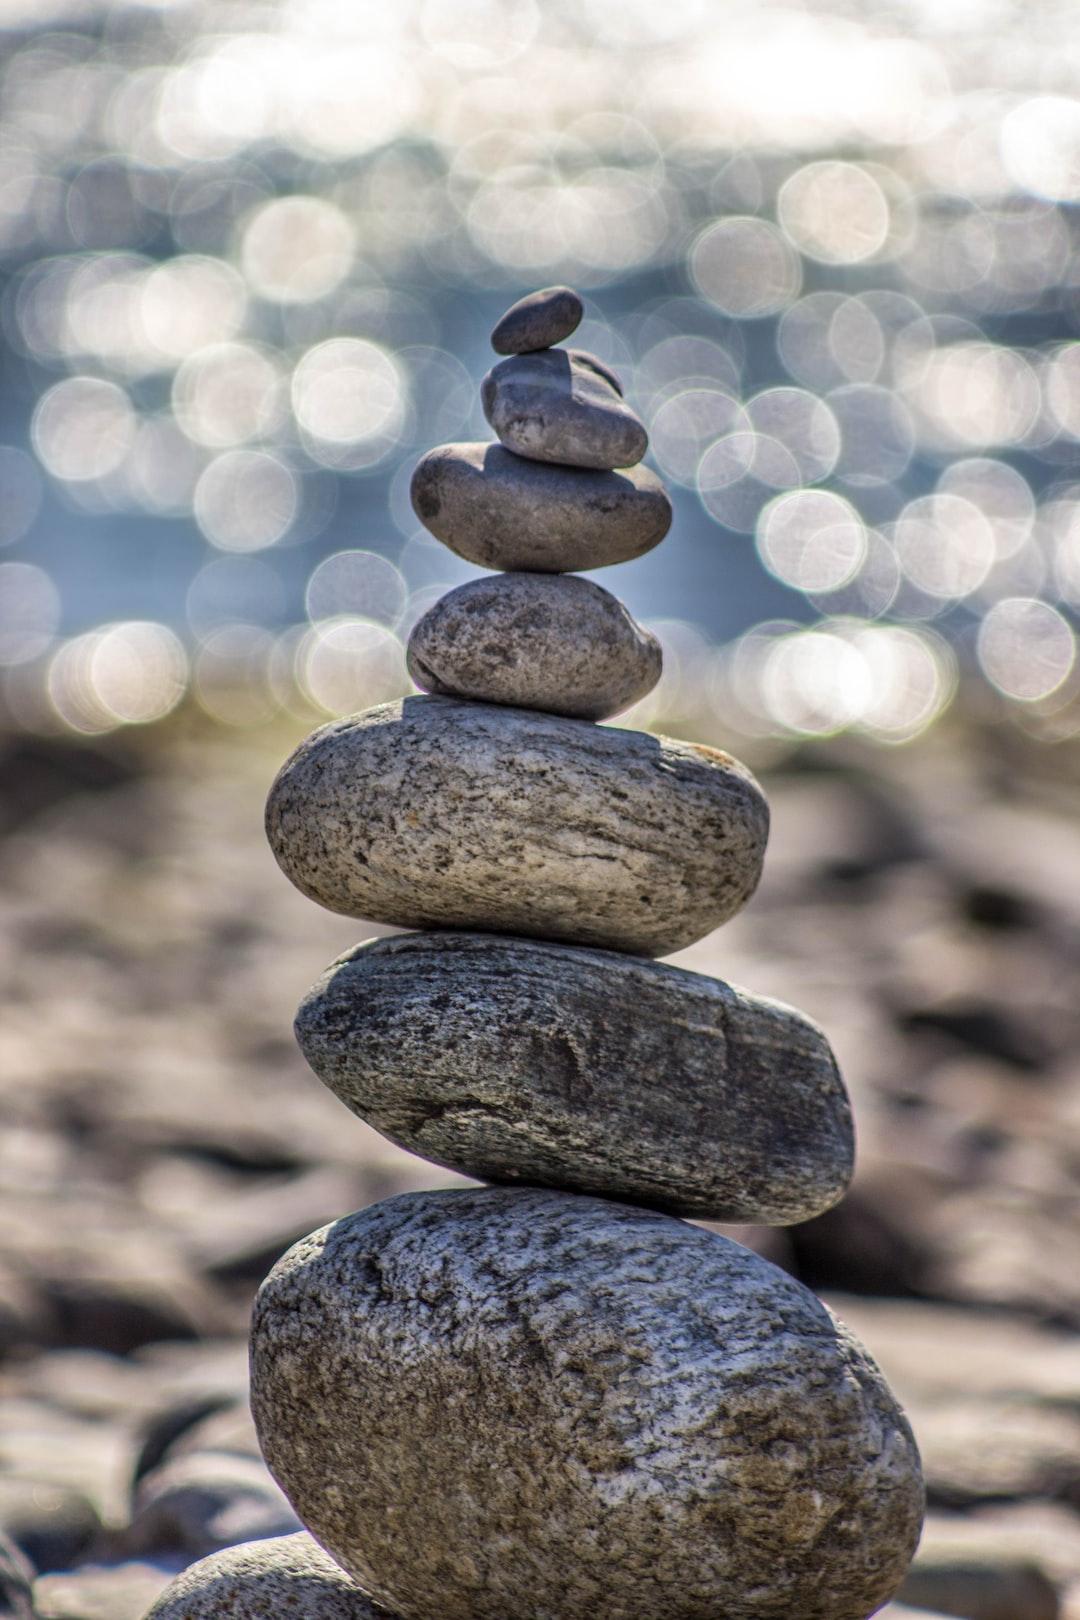 Balancing the Flow and Mindfulness